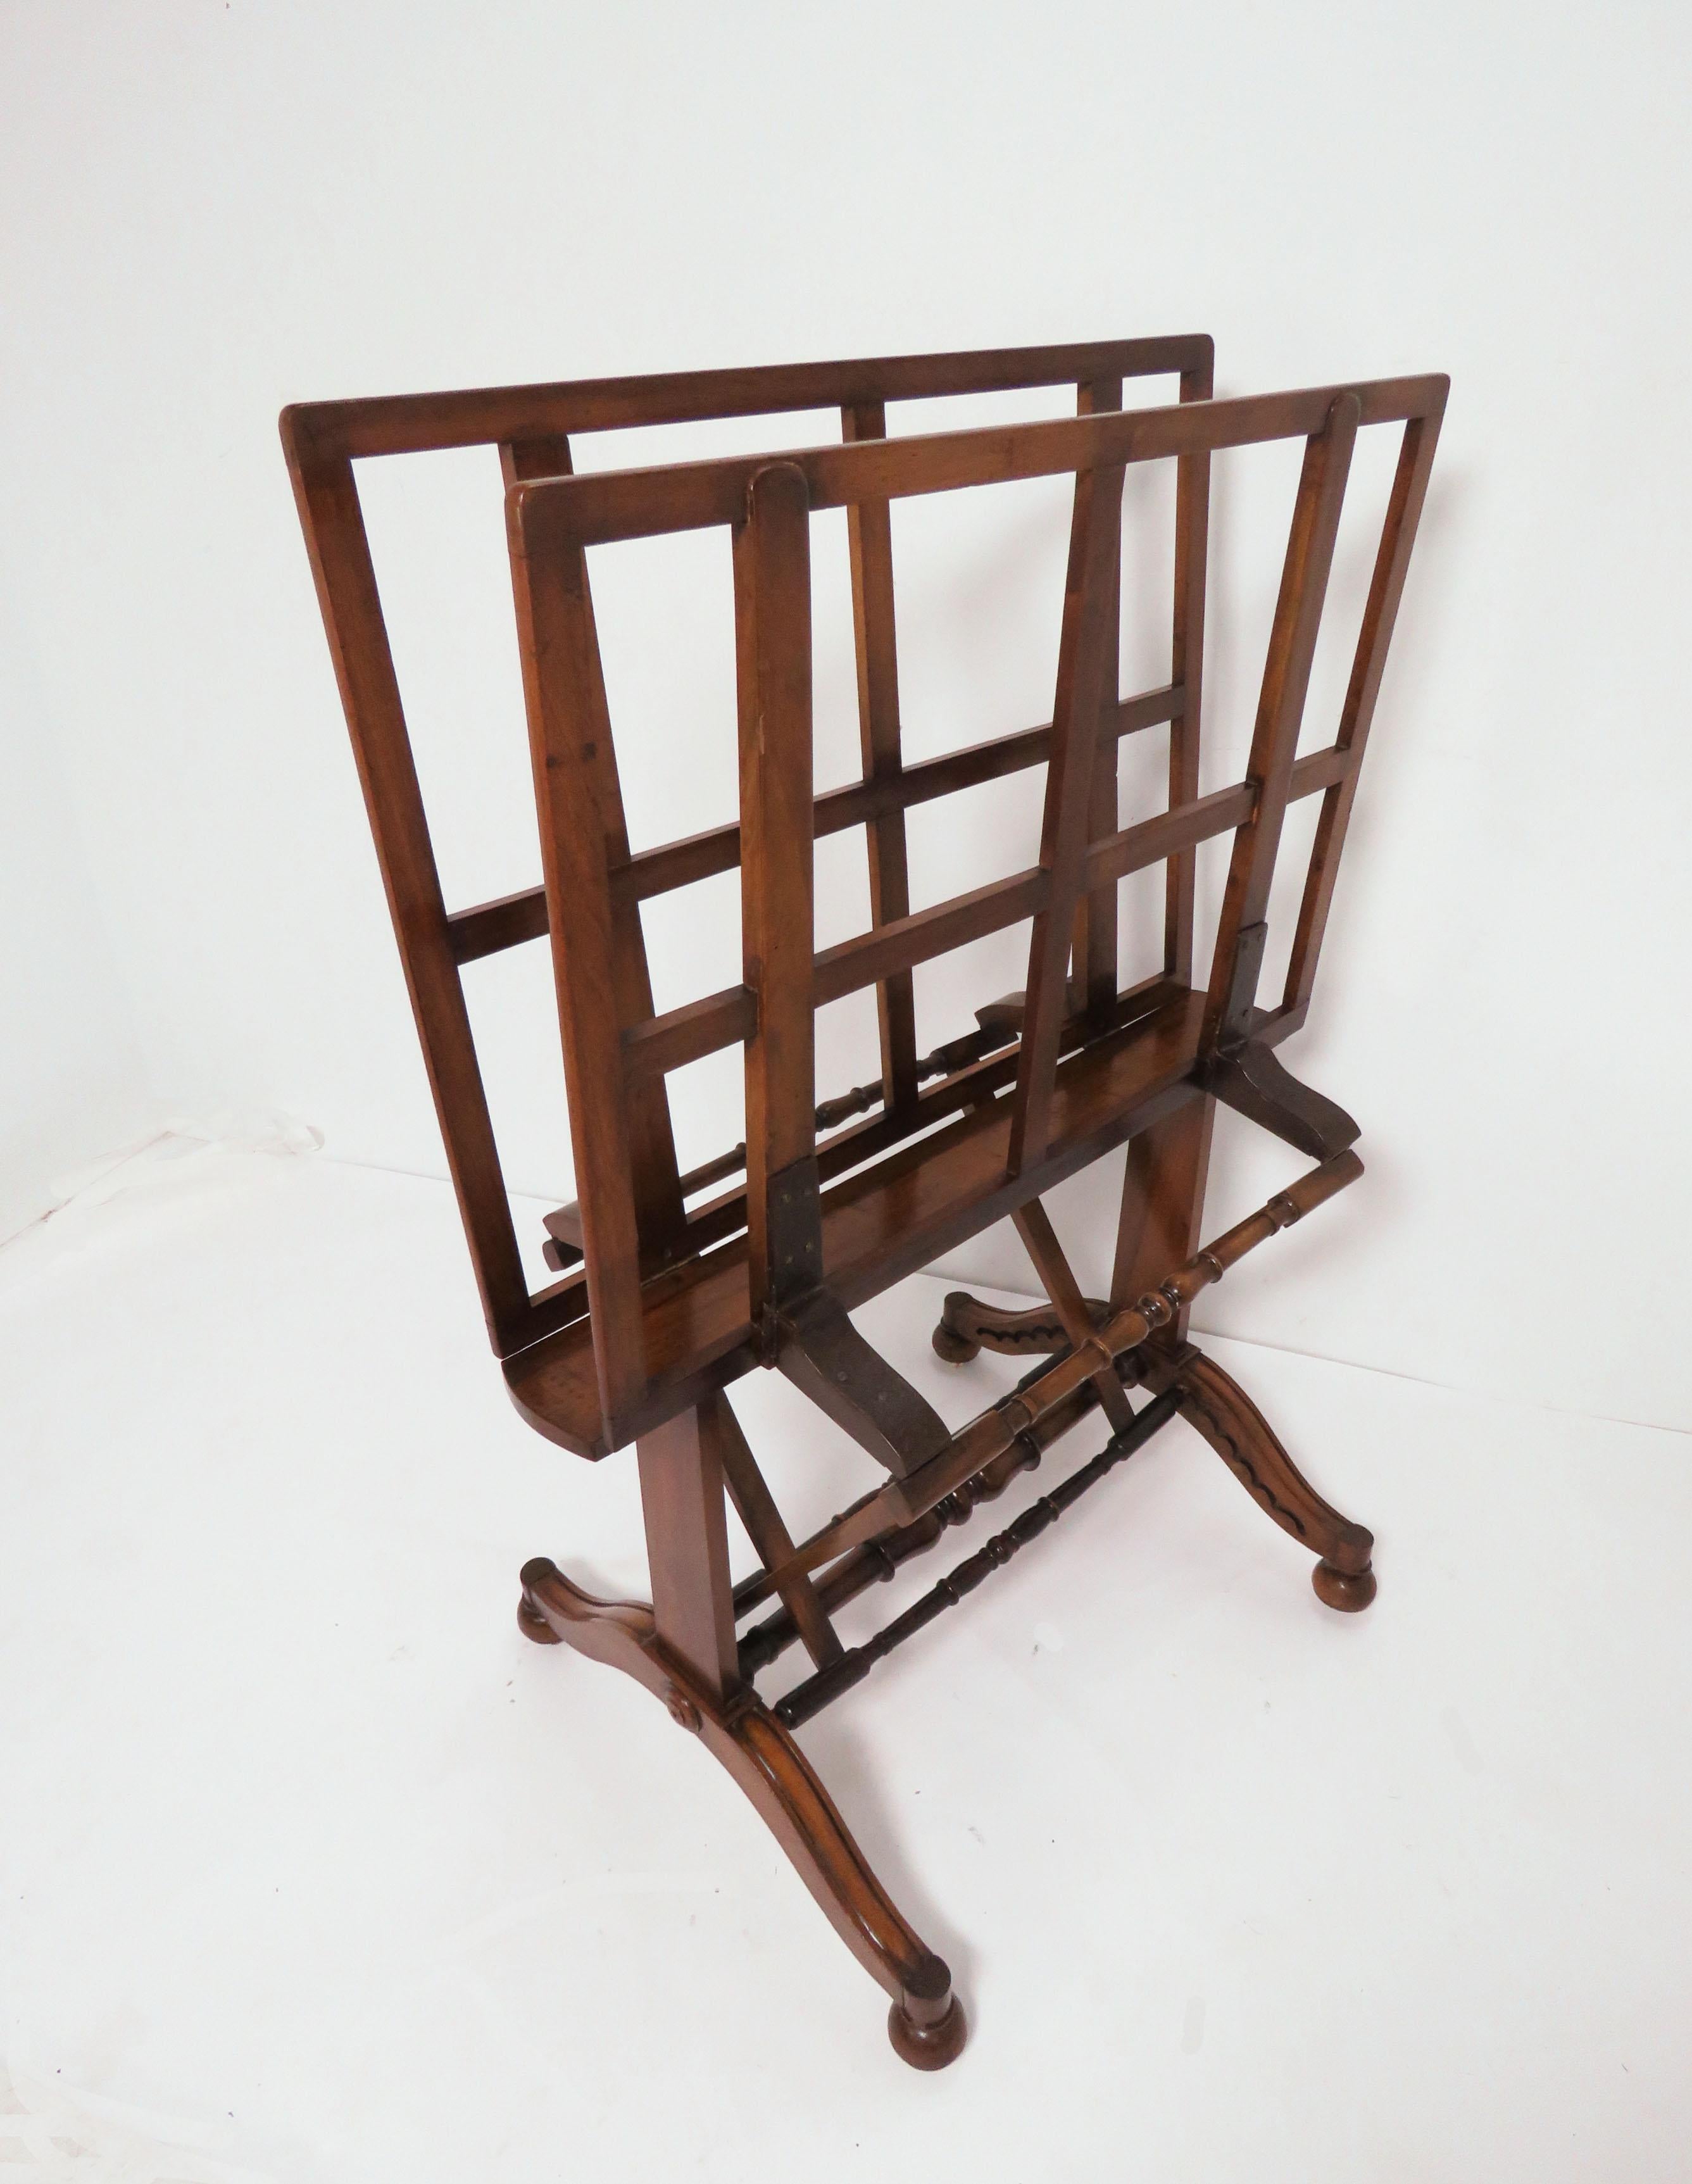 Adjustable folio stand in walnut by Robert Strahan & Co. Furniture, Dublin, Ireland, circa 1830s. Quite useful for prints or photograph display. At most upright position, measures 50.5